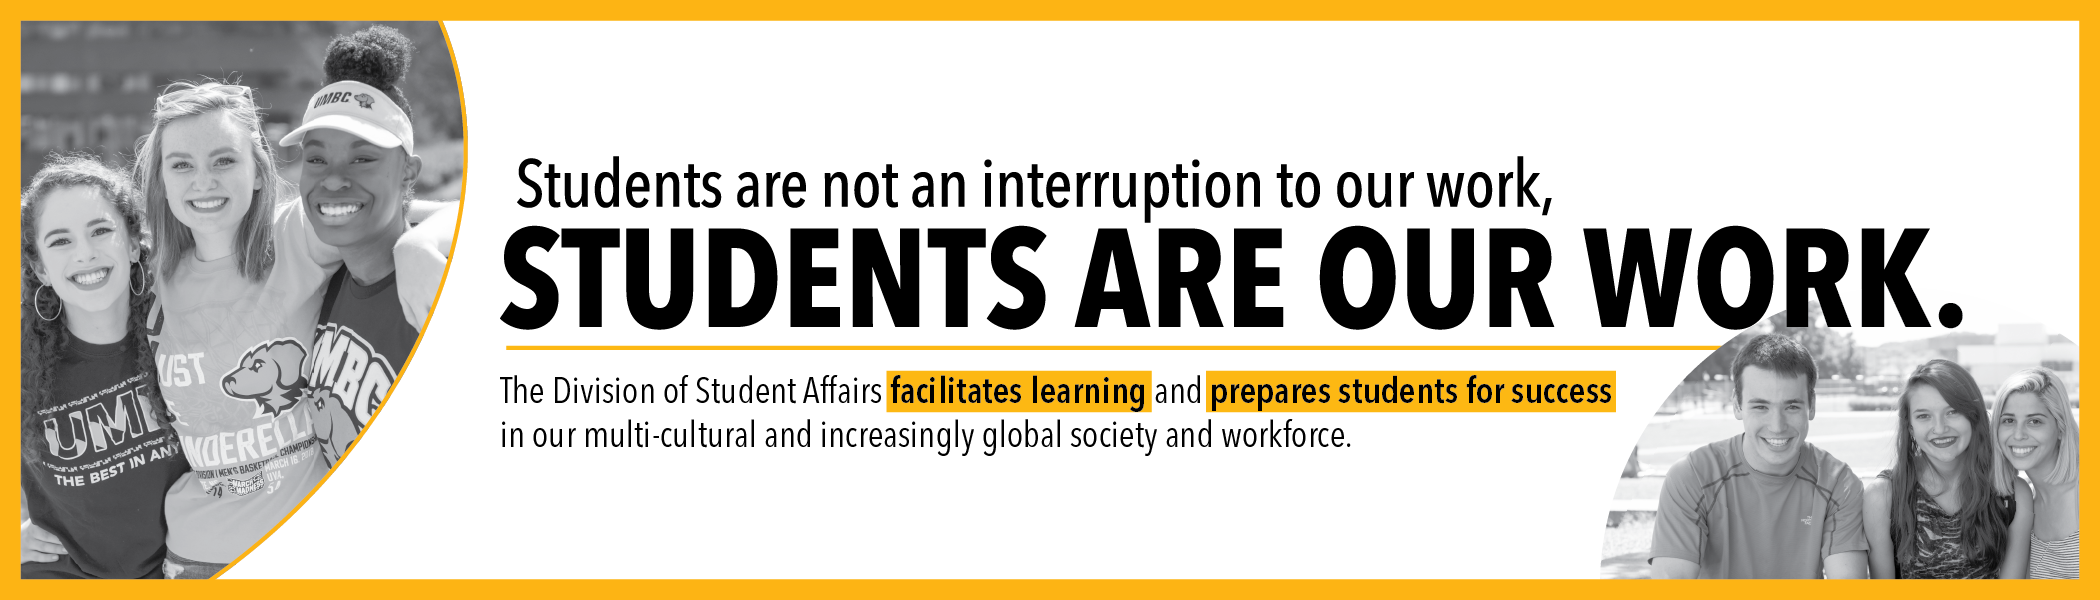 Students are not an interruption to our work, students are our work